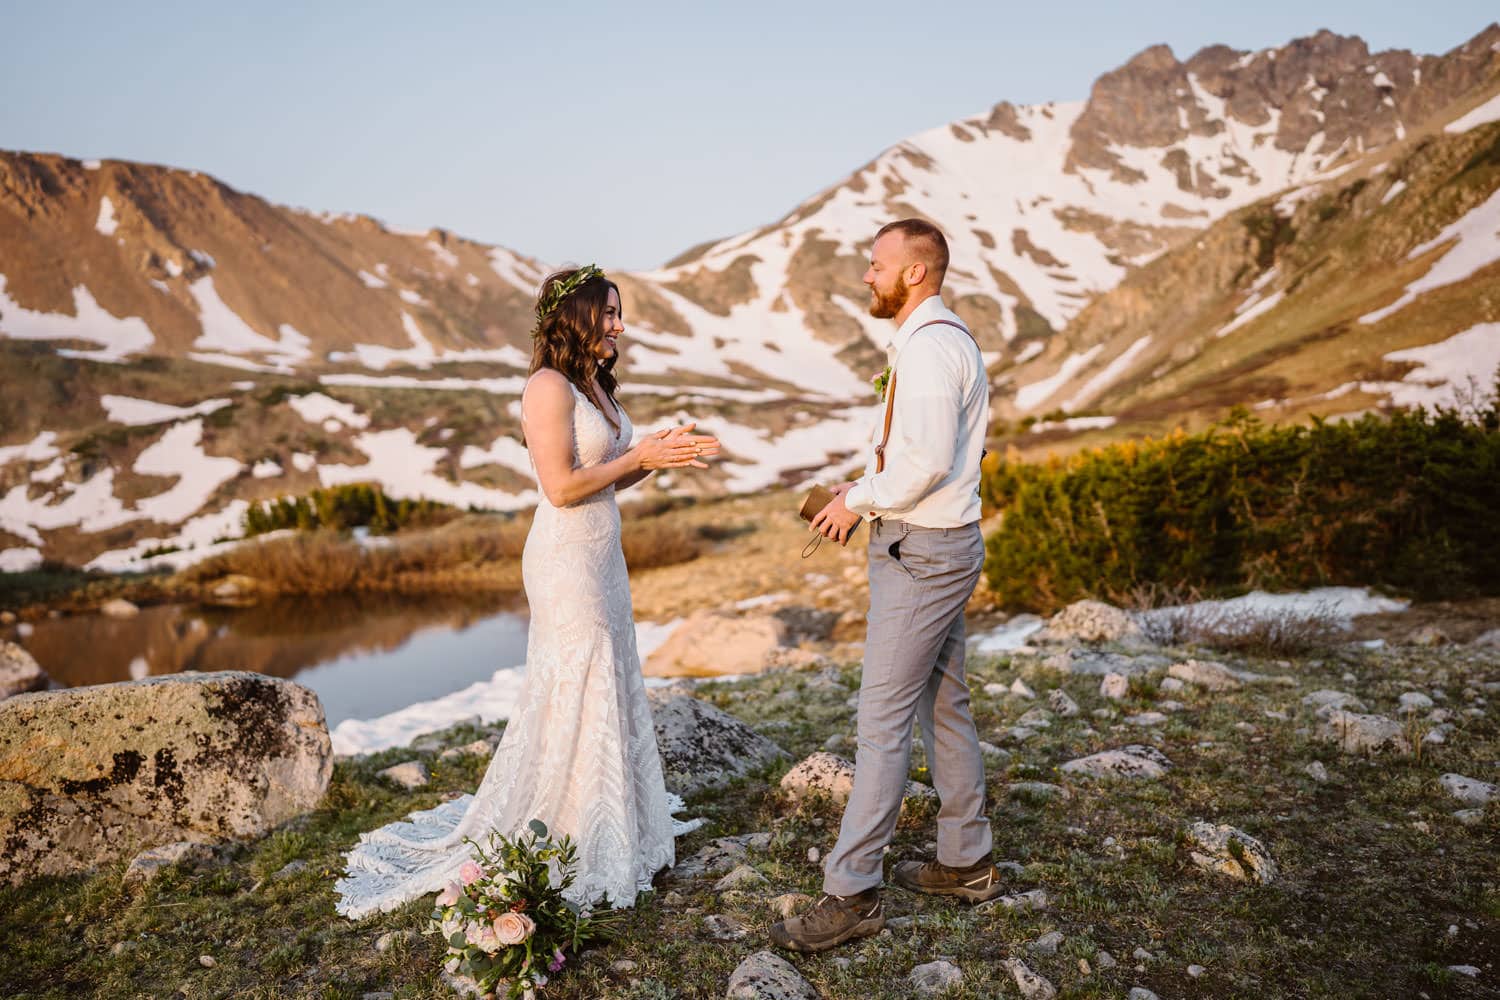 Bride and Groom Vow Ceremony at Sunrise Elopement in Colorado